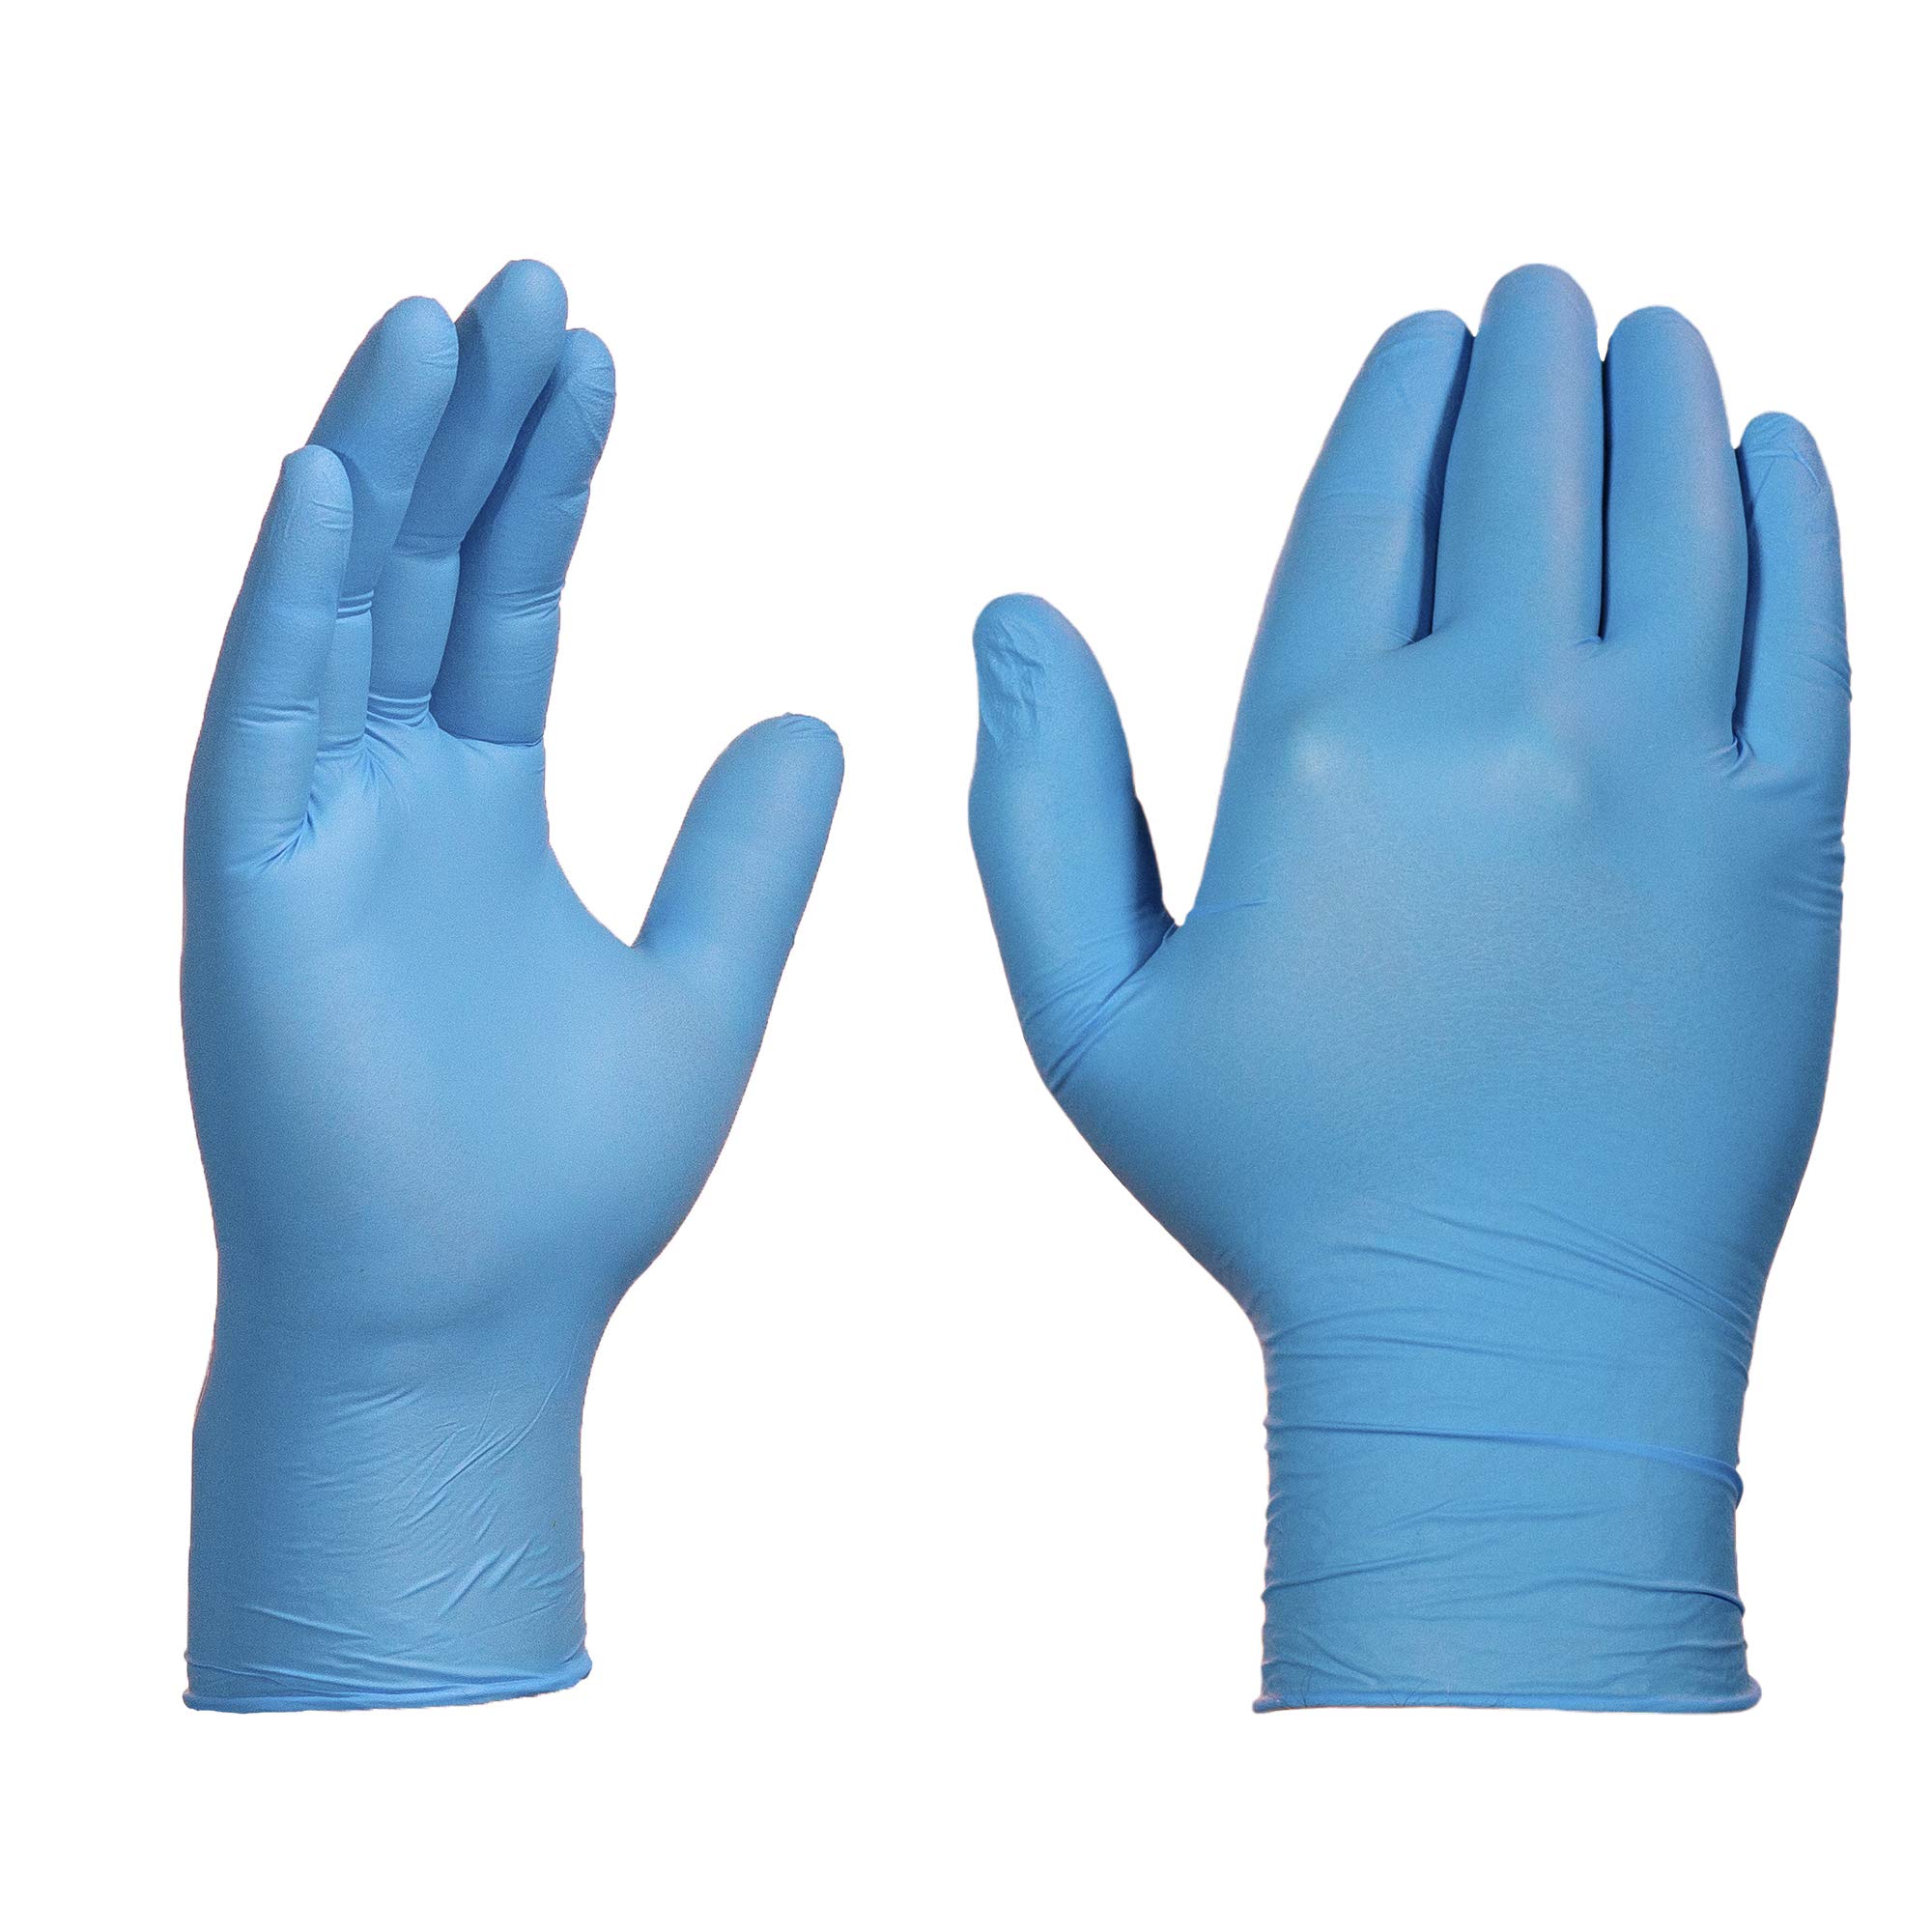 AMMEX Blue Nitrile Exam Gloves, Box of 100, 3 Mil, Size Small, Latex Free, Powder Free, Textured, Disposable, Non-Sterile, Food Safe, APFN42100-BX